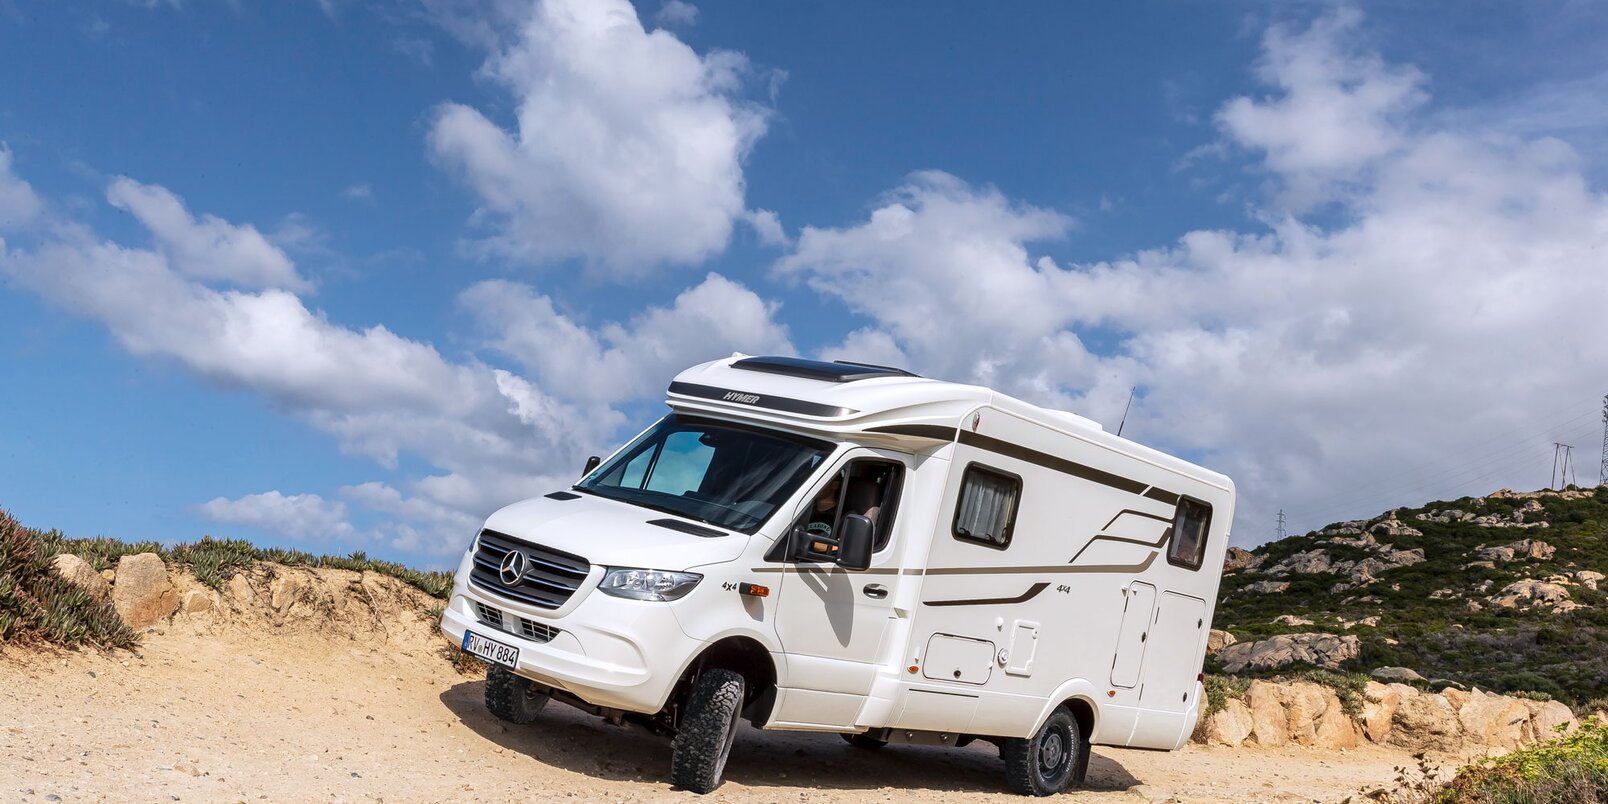 HYMER ML-T in an inclined position in coarse gravel, sandy terrain with rock formations and a blue sky with white clouds